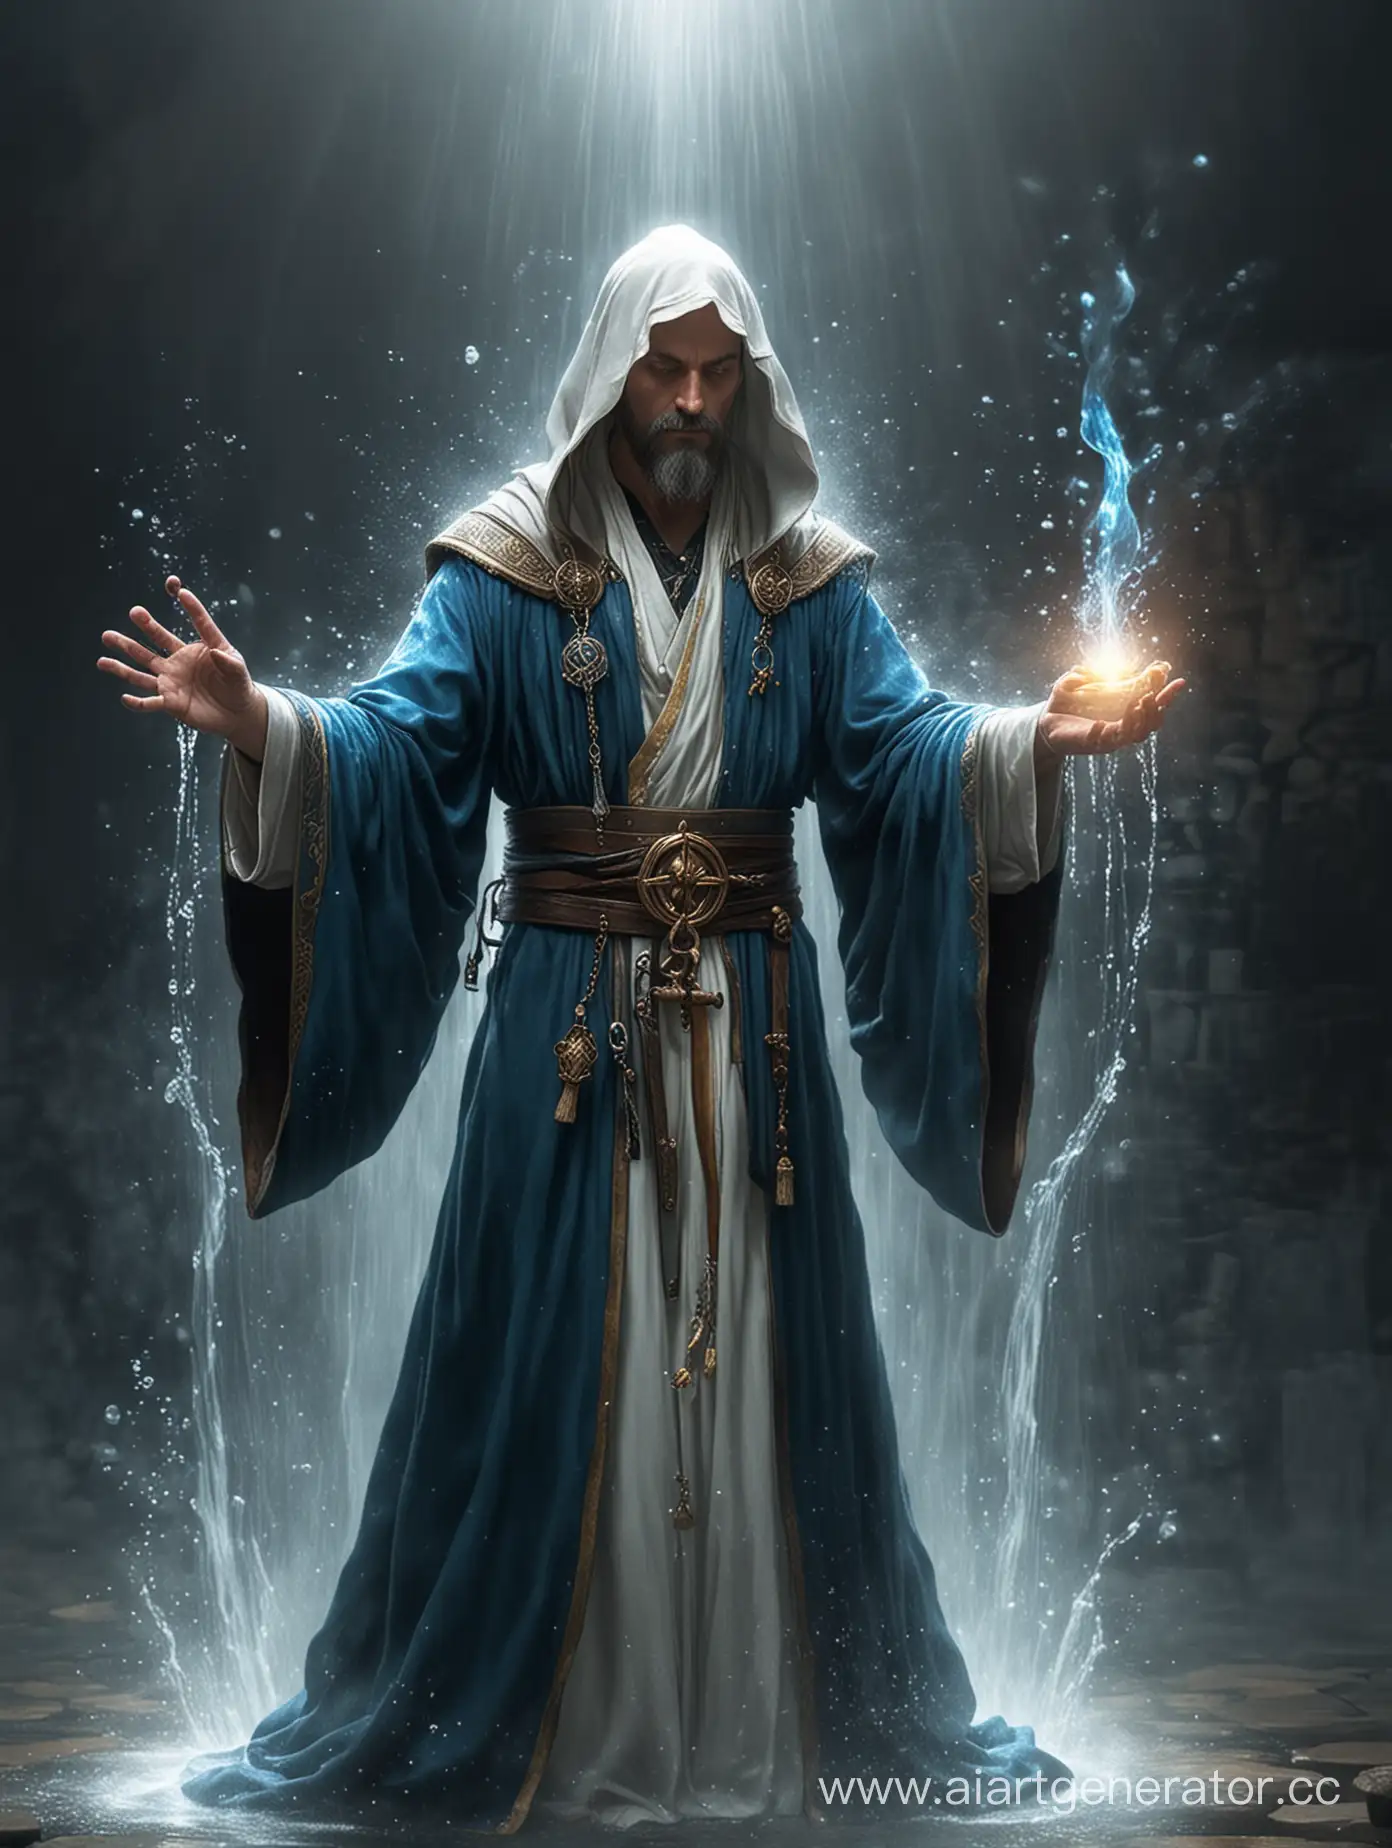 Holy-Water-Mage-Casting-Spells-in-Mystical-Ritual